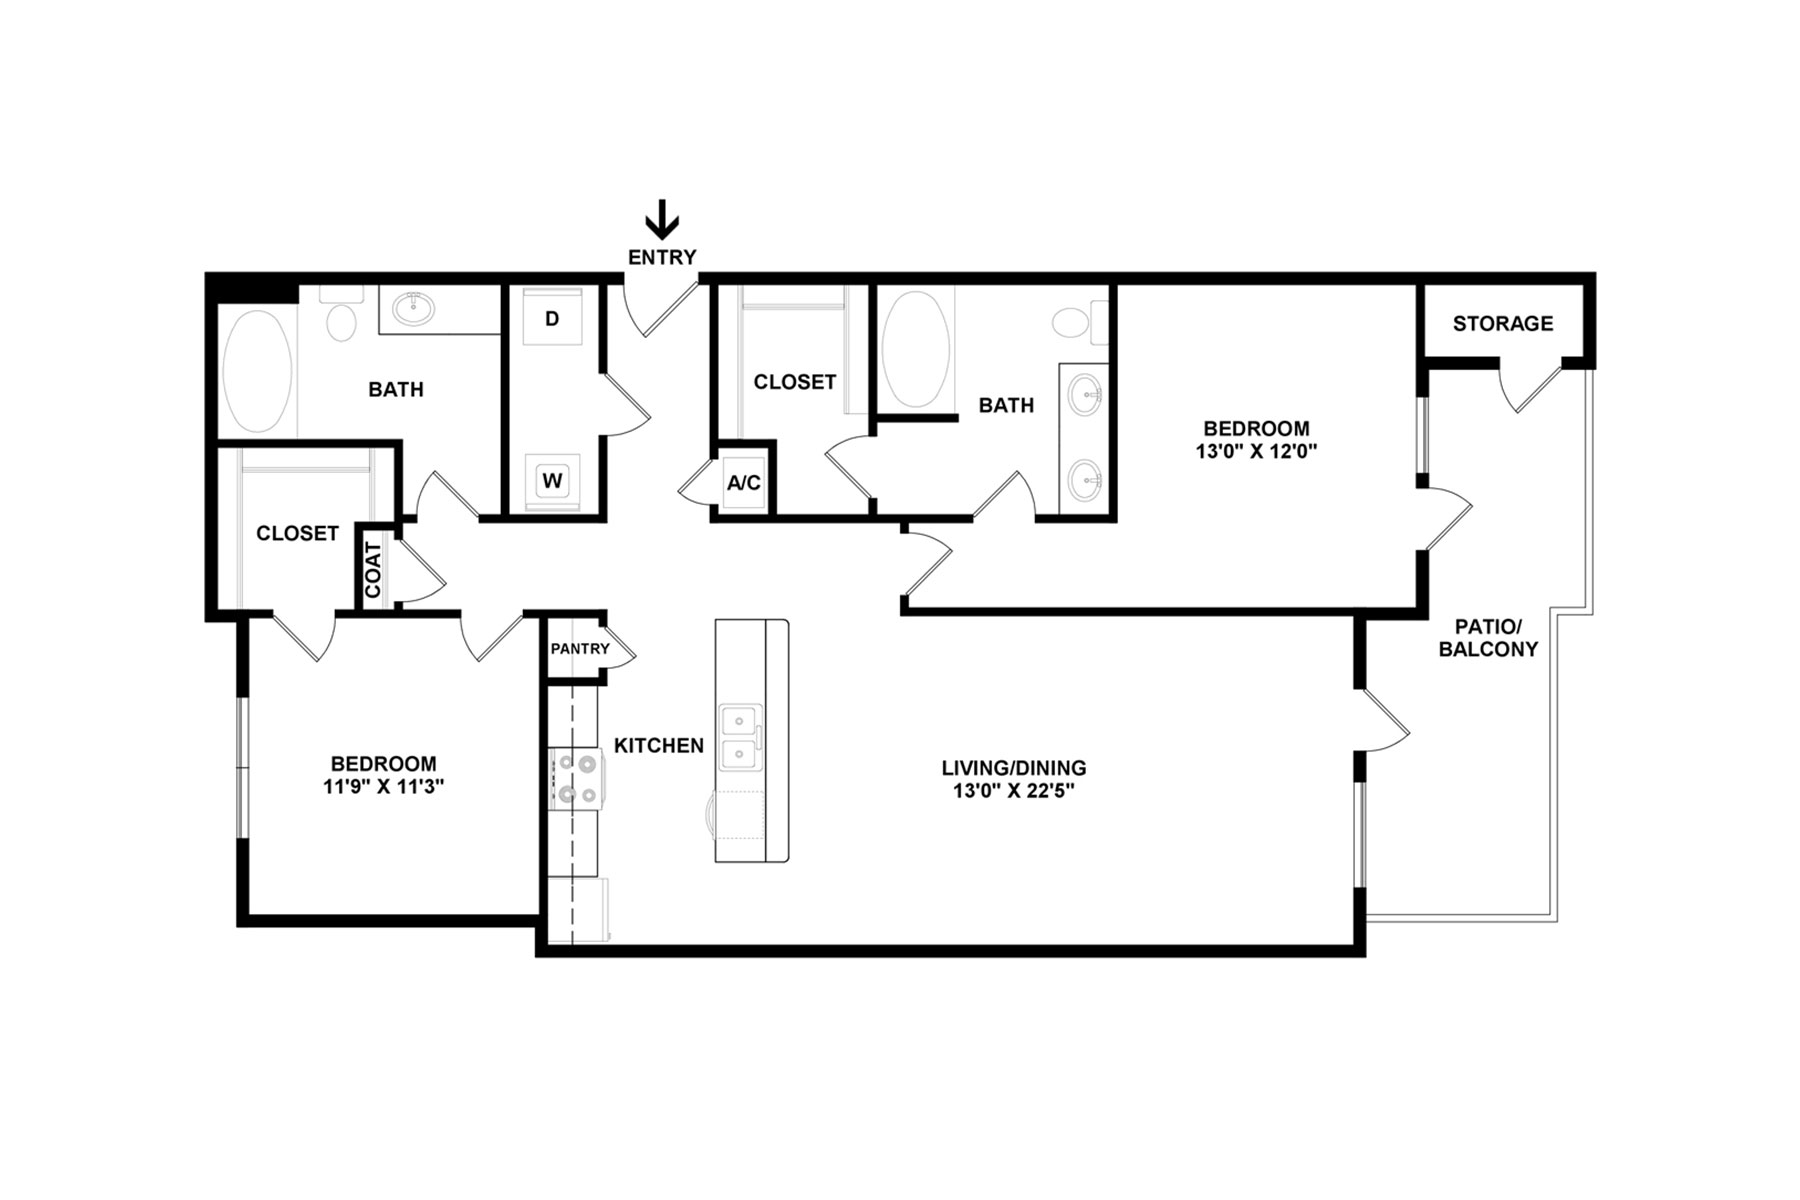 B2 floor plan - Madison at Westinghouse Apartments in Georgetown, TX